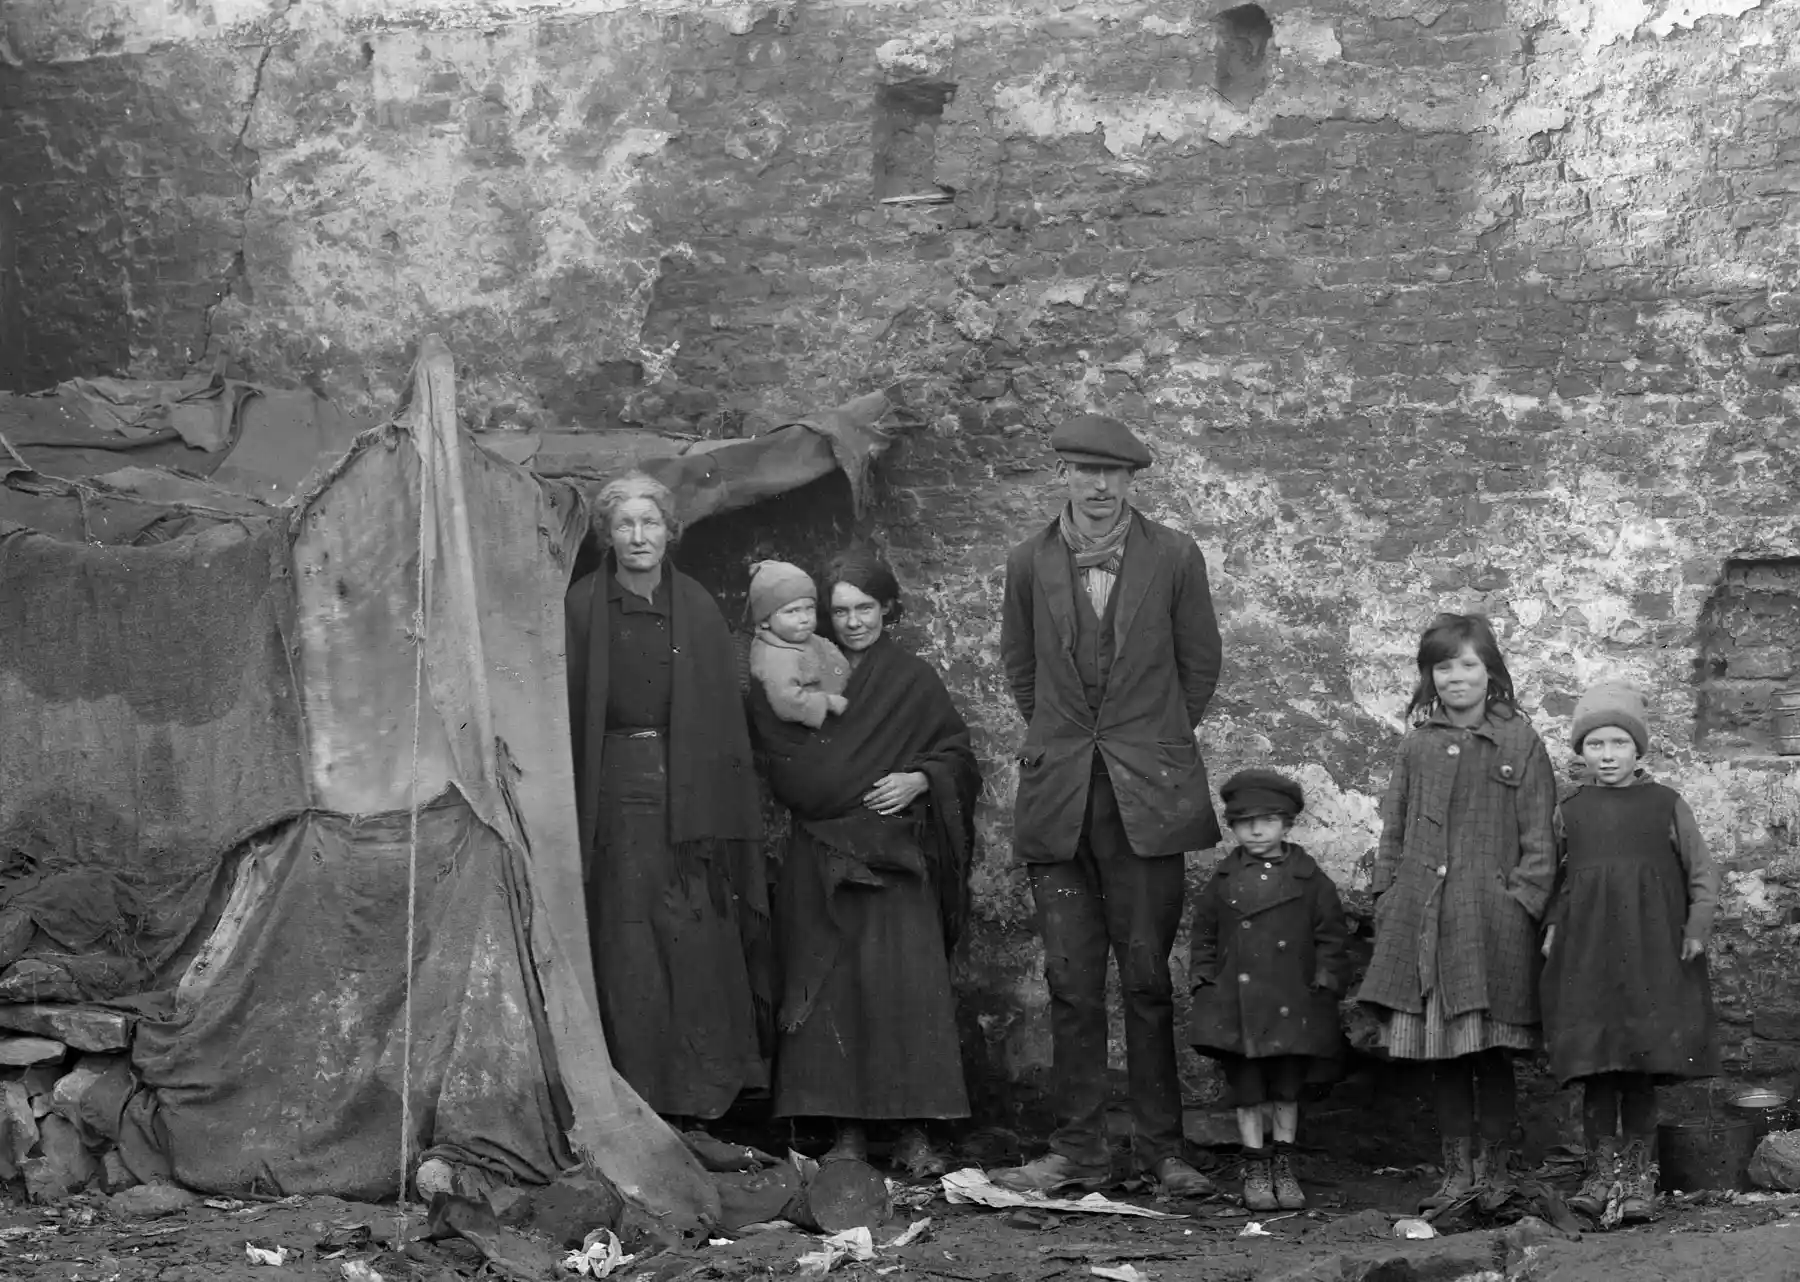 A group of Irish people from the 1800s beside a makeshift shelter